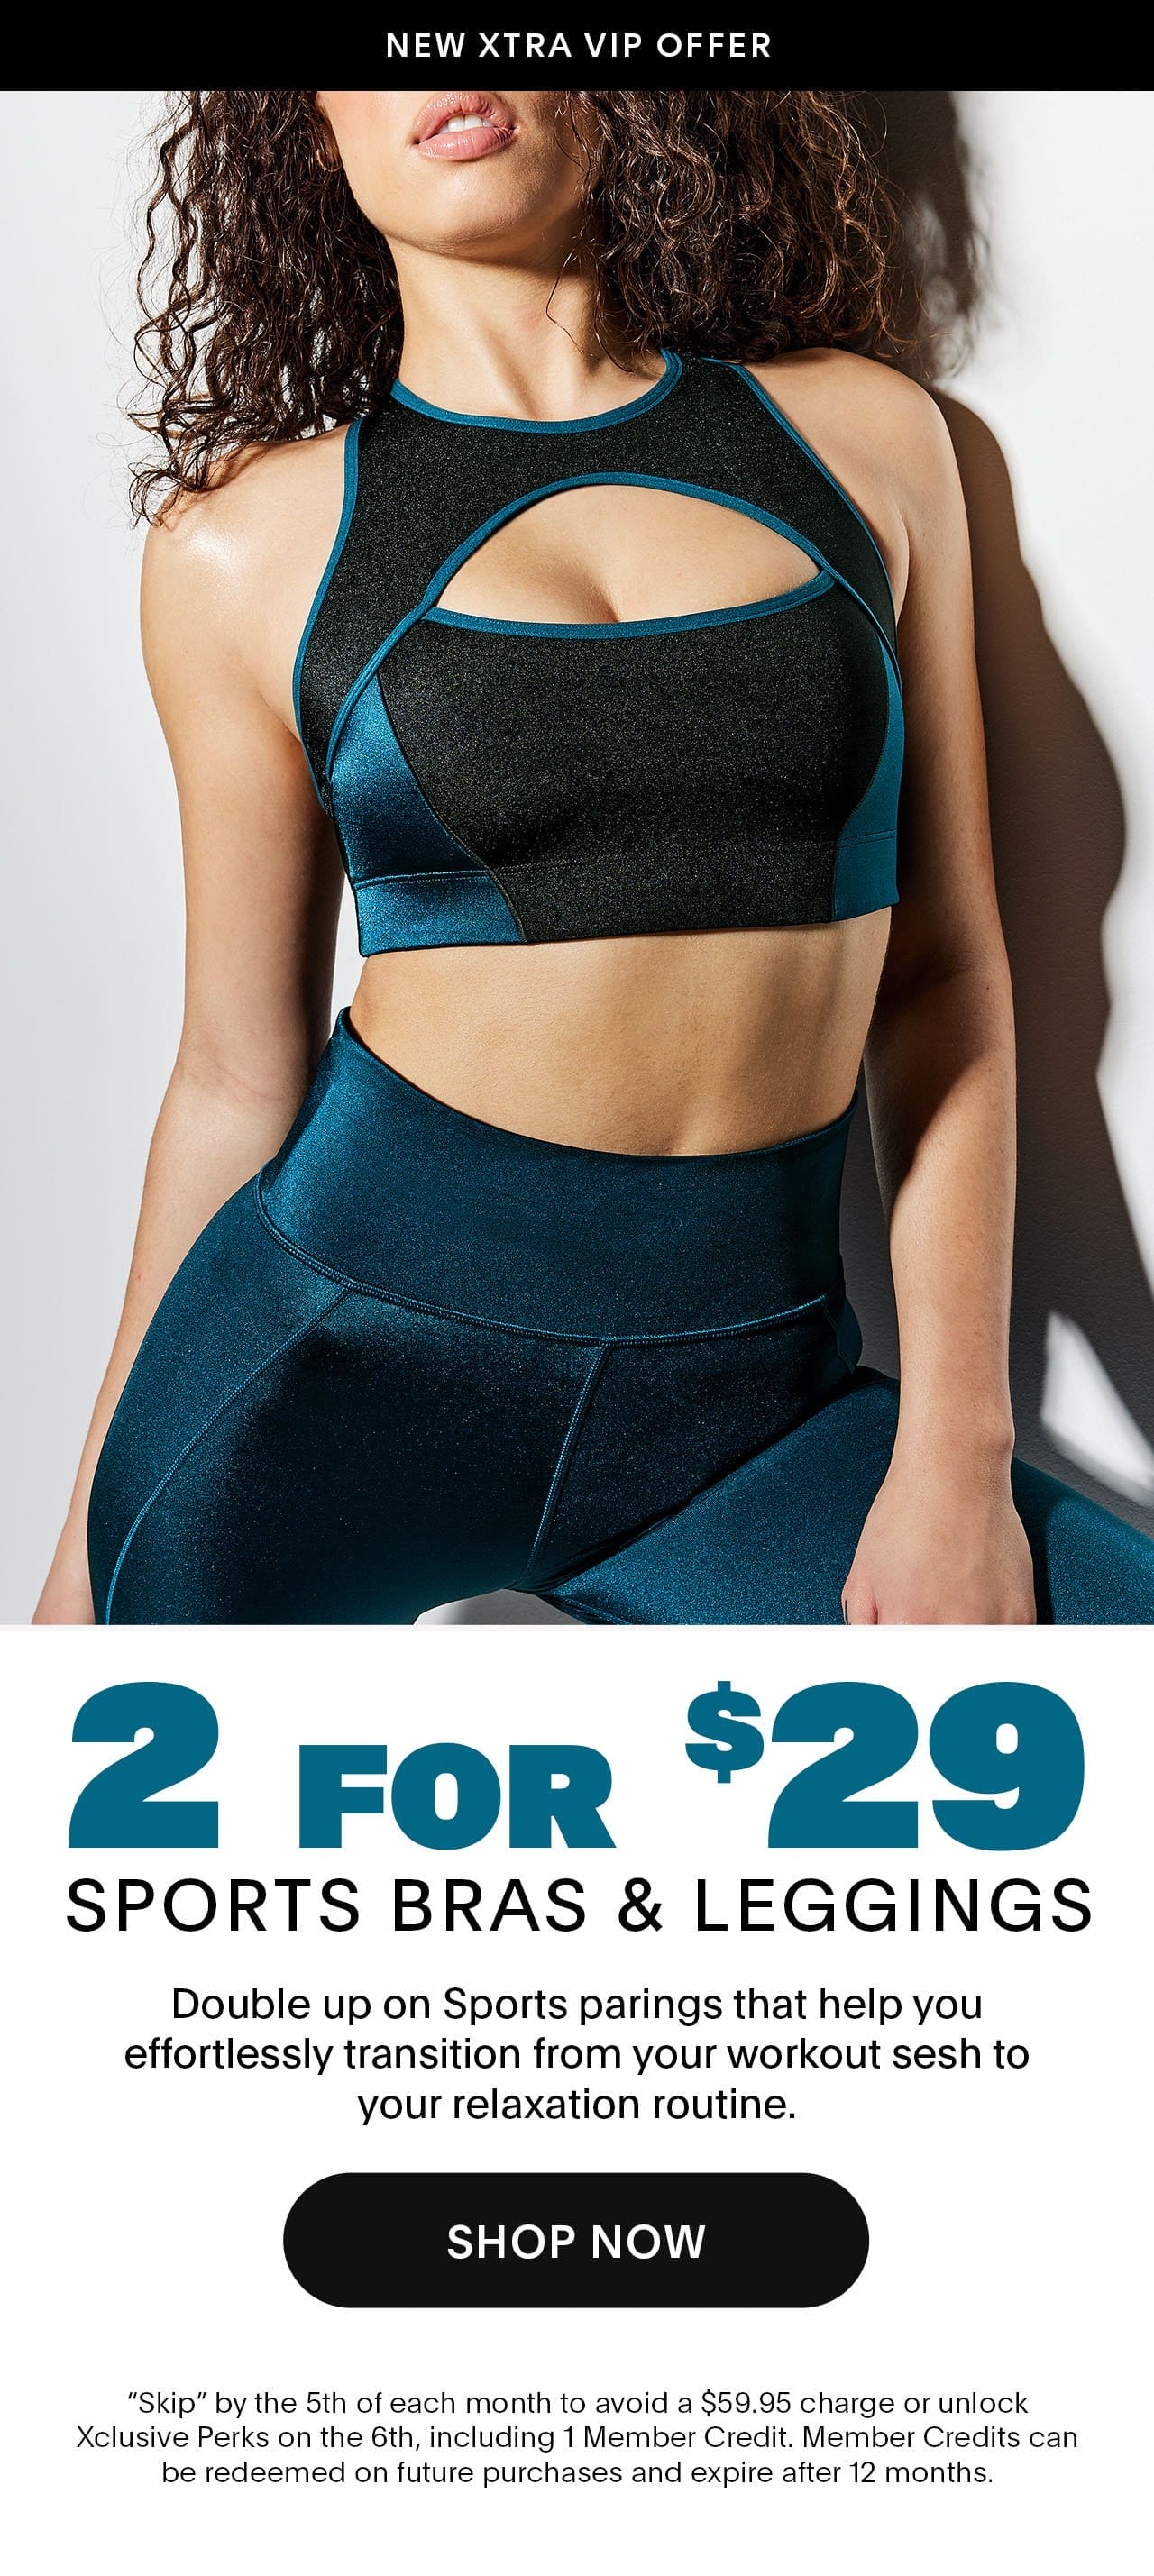 2 for \\$29 Sports Bras & Leggings Double up on Sports parings that help you effortlessly transition from your workout sesh to your relaxation routine. 